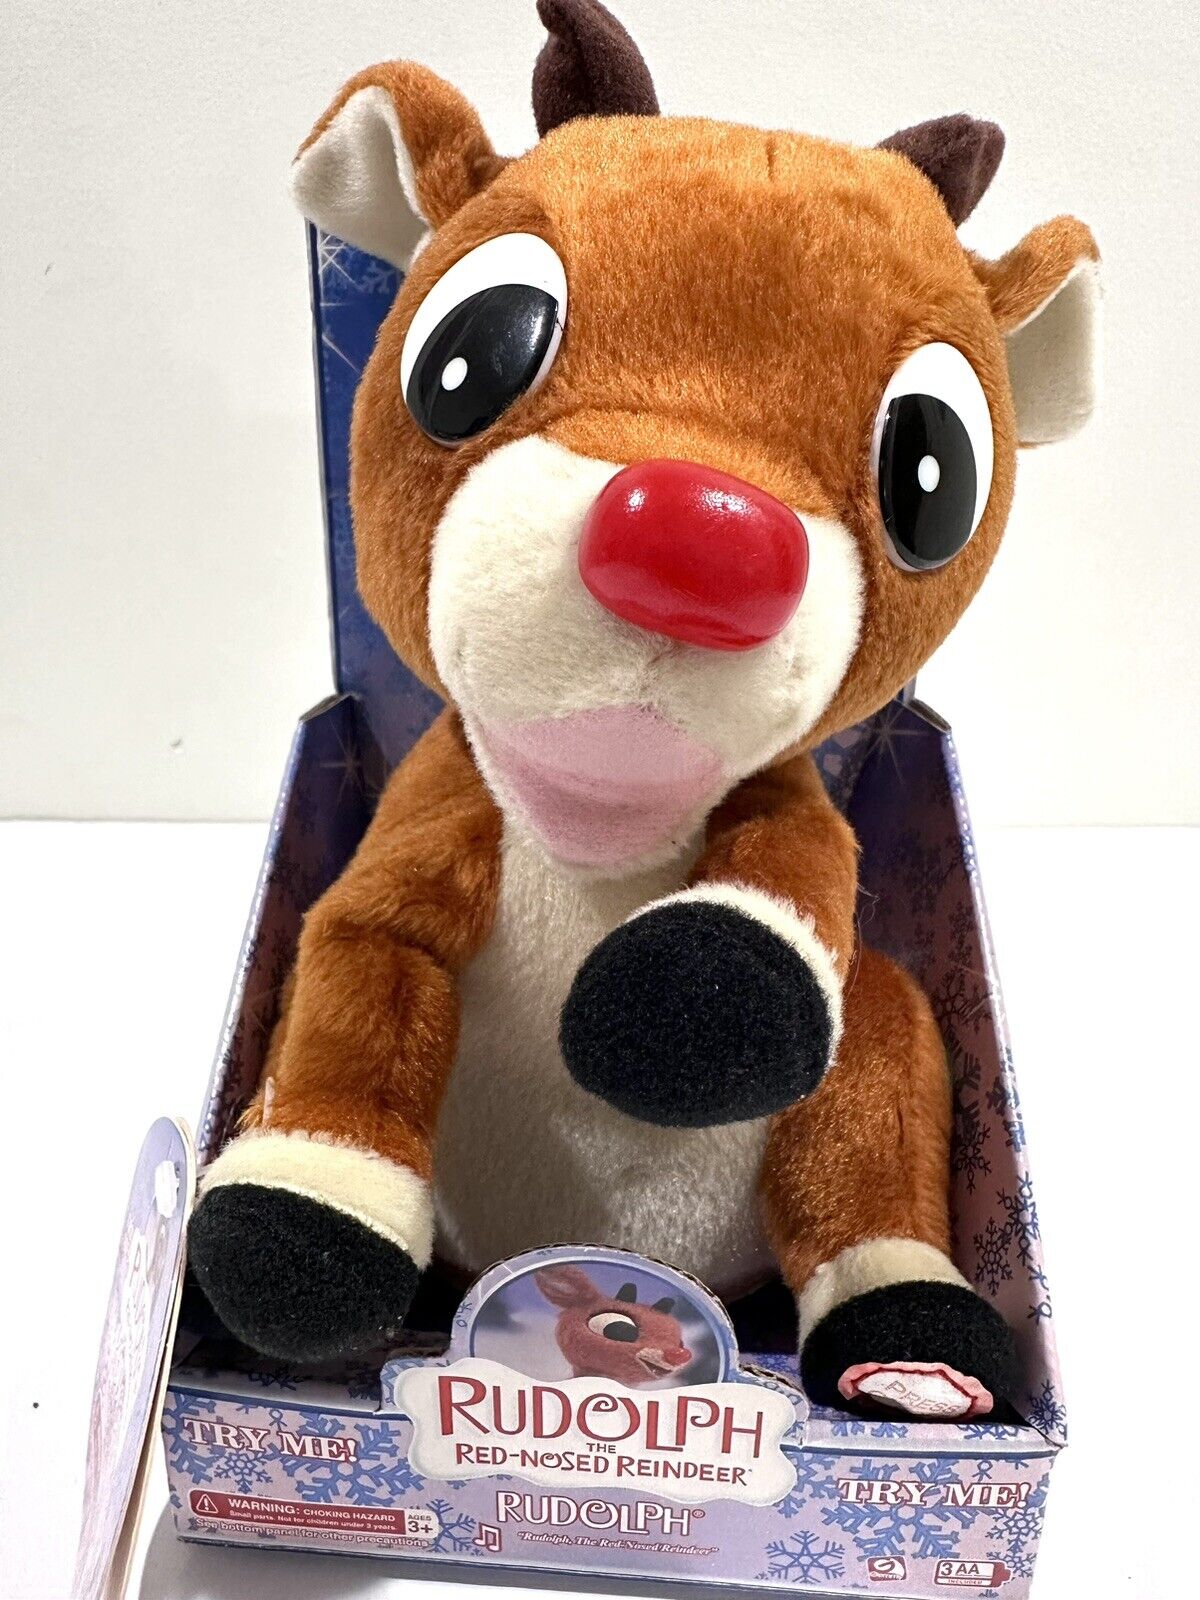 Vtg Gemmy Rudolph The Red Nosed Reindeer Plush Singing Light Up 2004 New In Box